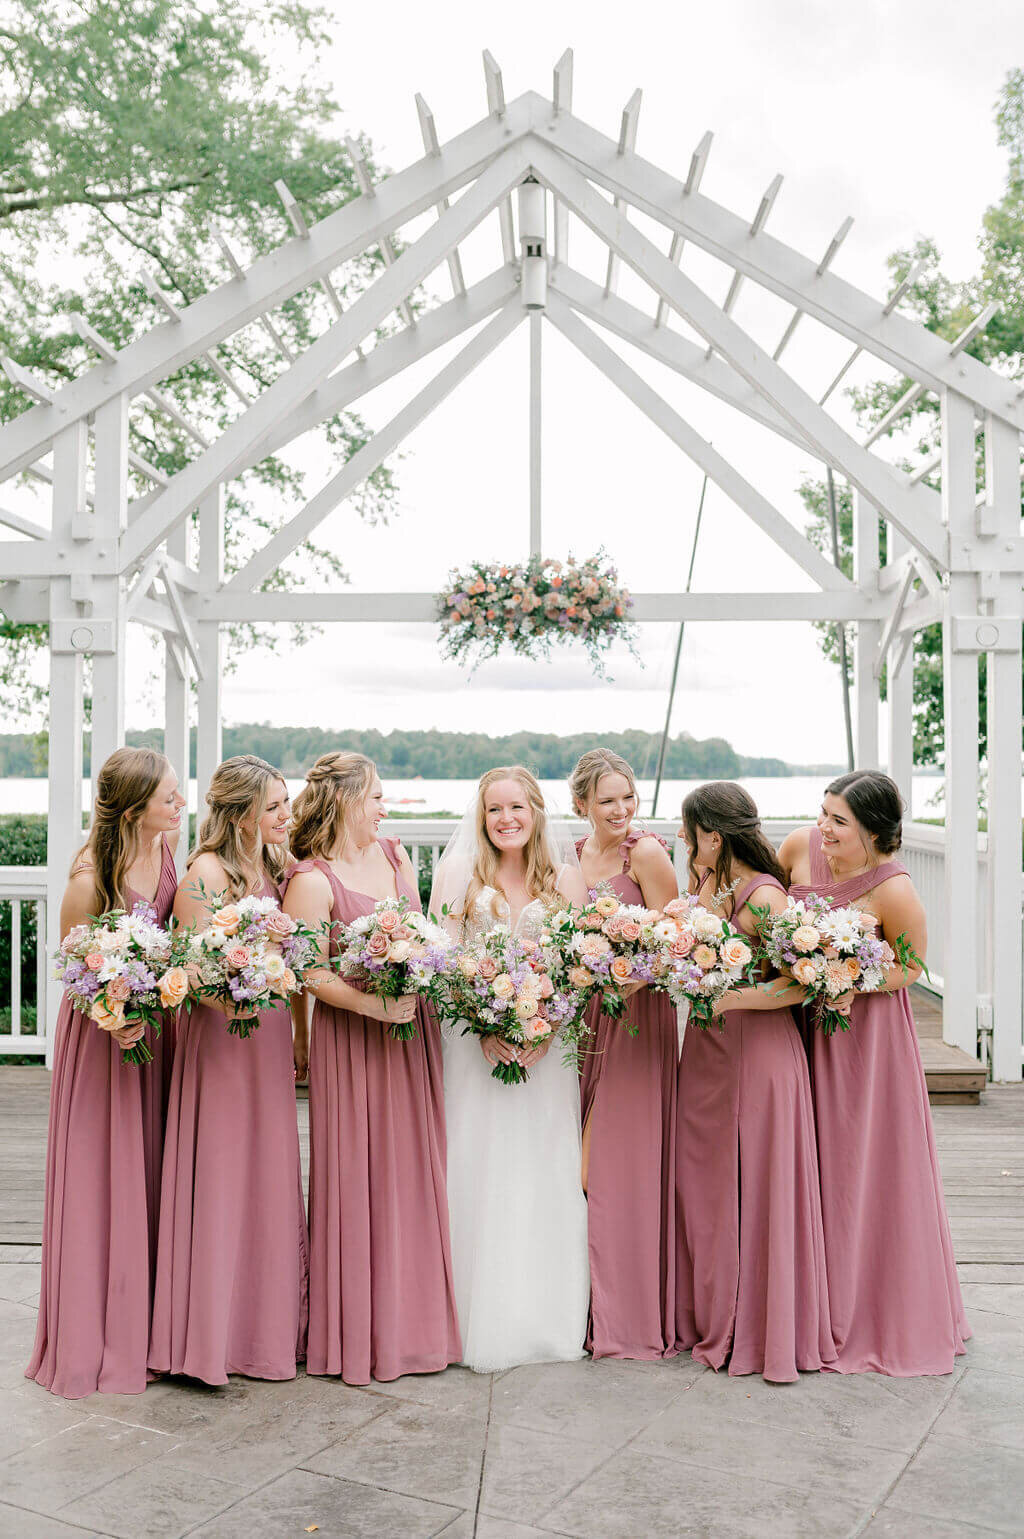 The bride and her bridesmaids looking at one another laughing and wearing mauve dresses.